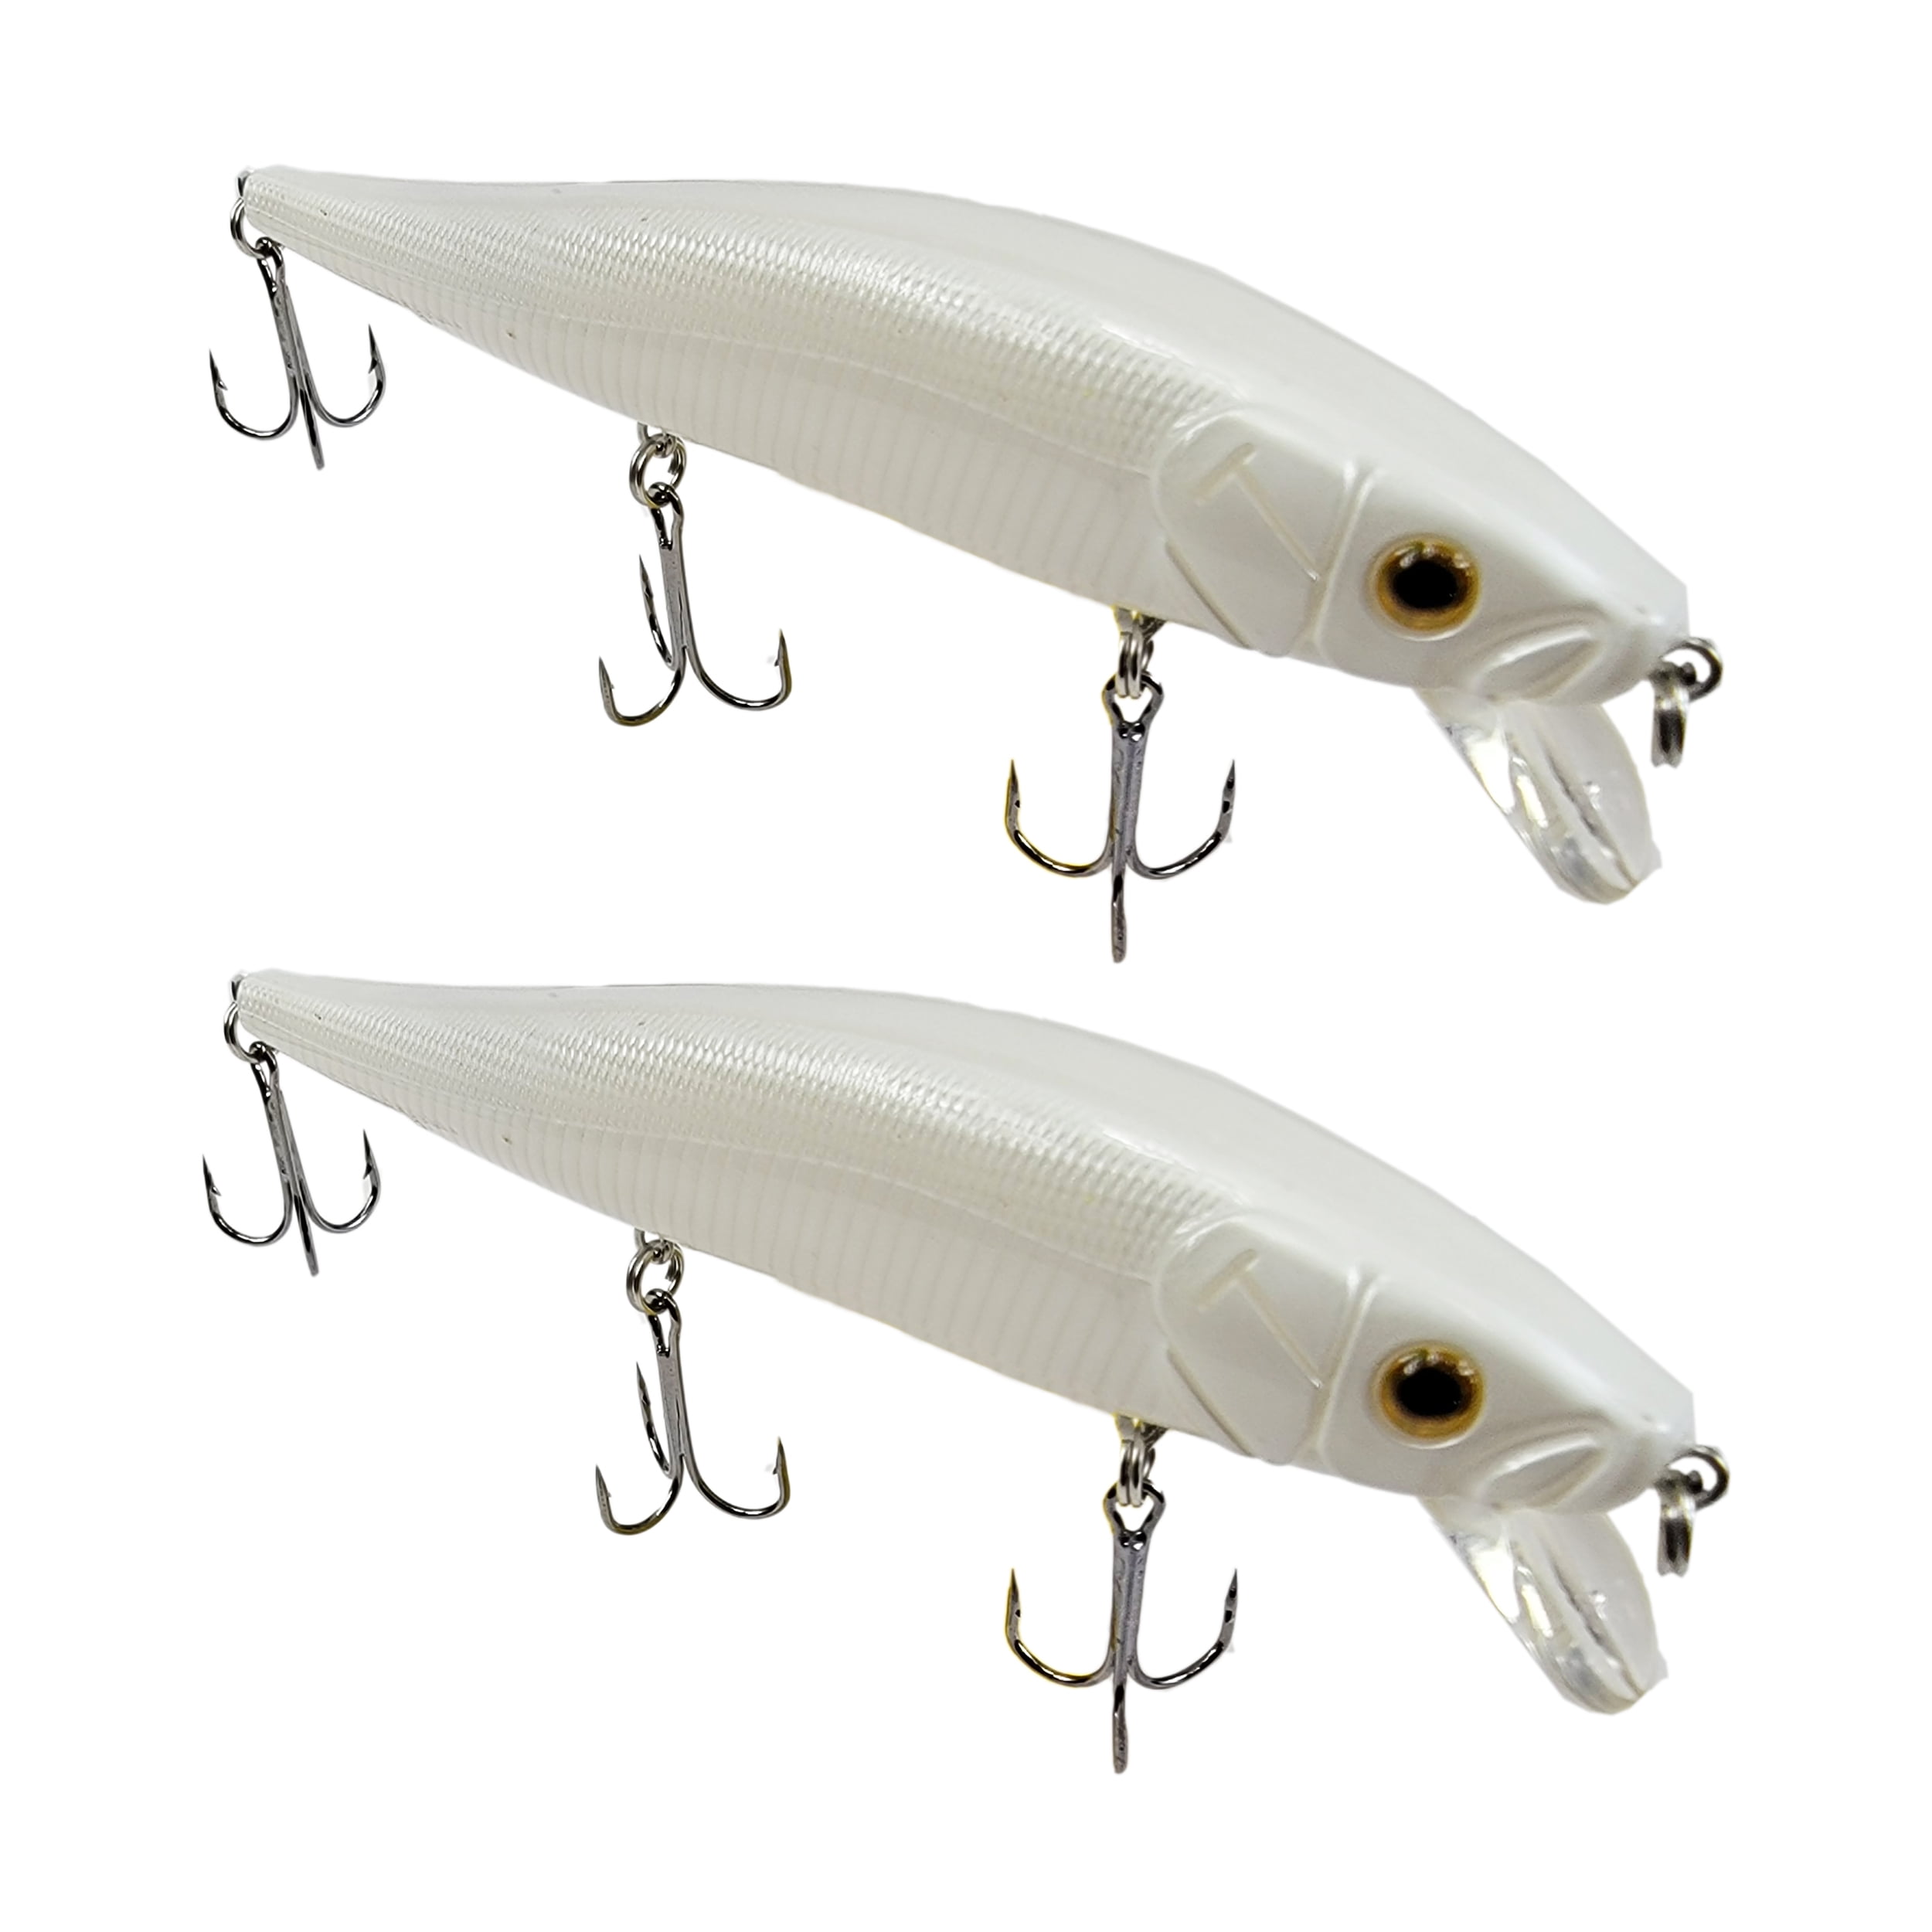 Tackle HD 2-Pack Fiddle-Styx Jerkbait, 4 3/8 x 9/16 Suspending Jerk Baits,  Freshwater or Saltwater Fishing Lures, Trout, Crappie, Walleye, or Bass  Lures, French Pearl 